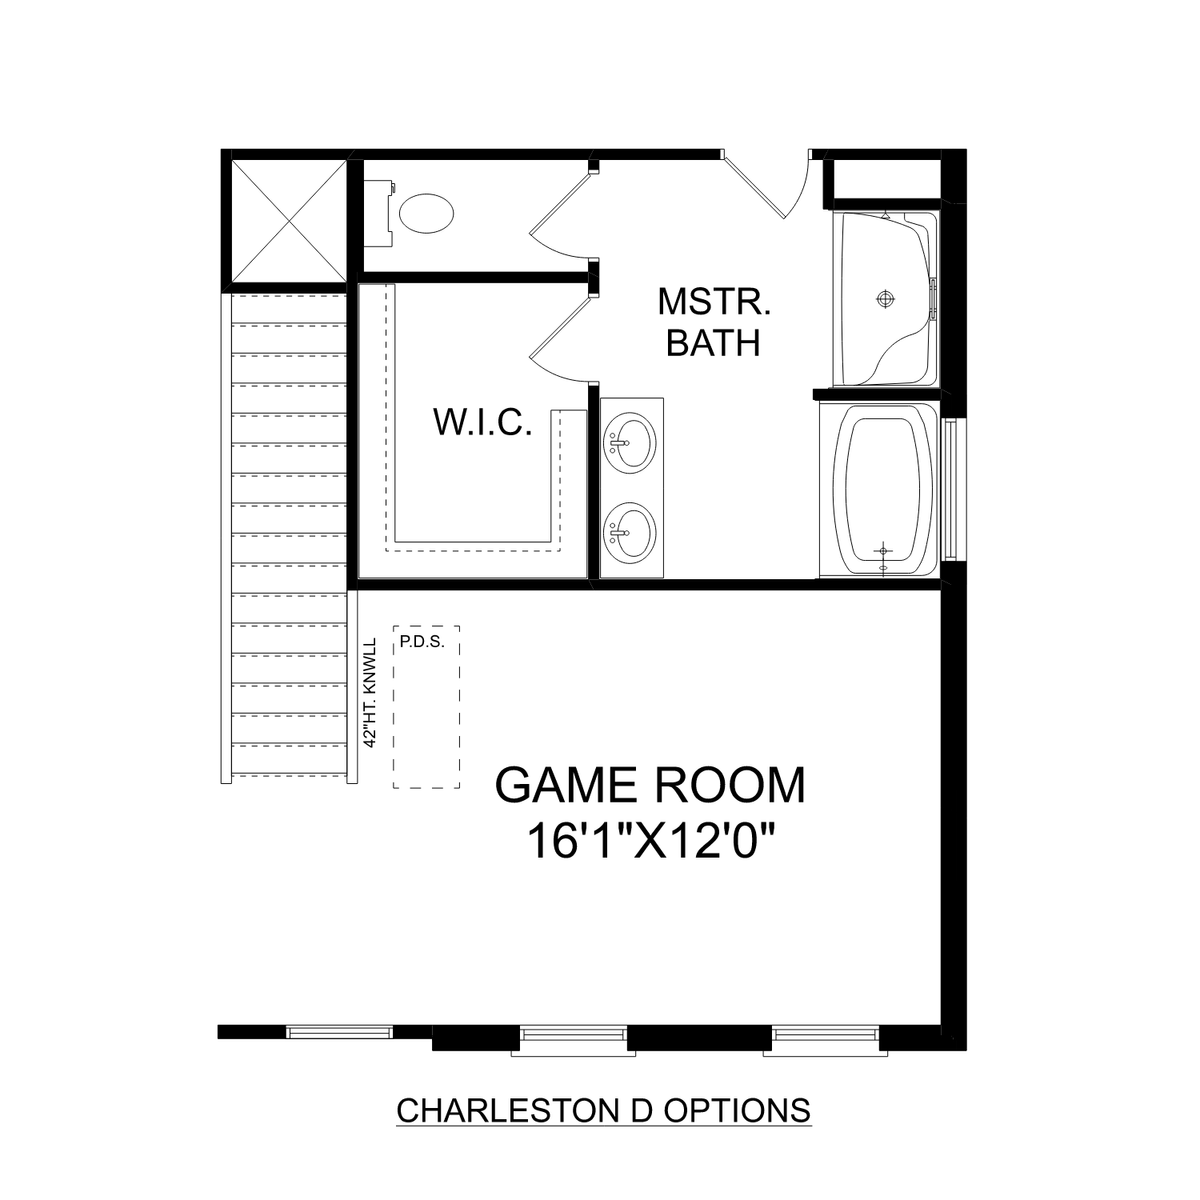 3 - The Charleston D buildable floor plan layout in Davidson Homes' The Reserve at North Ridge community.